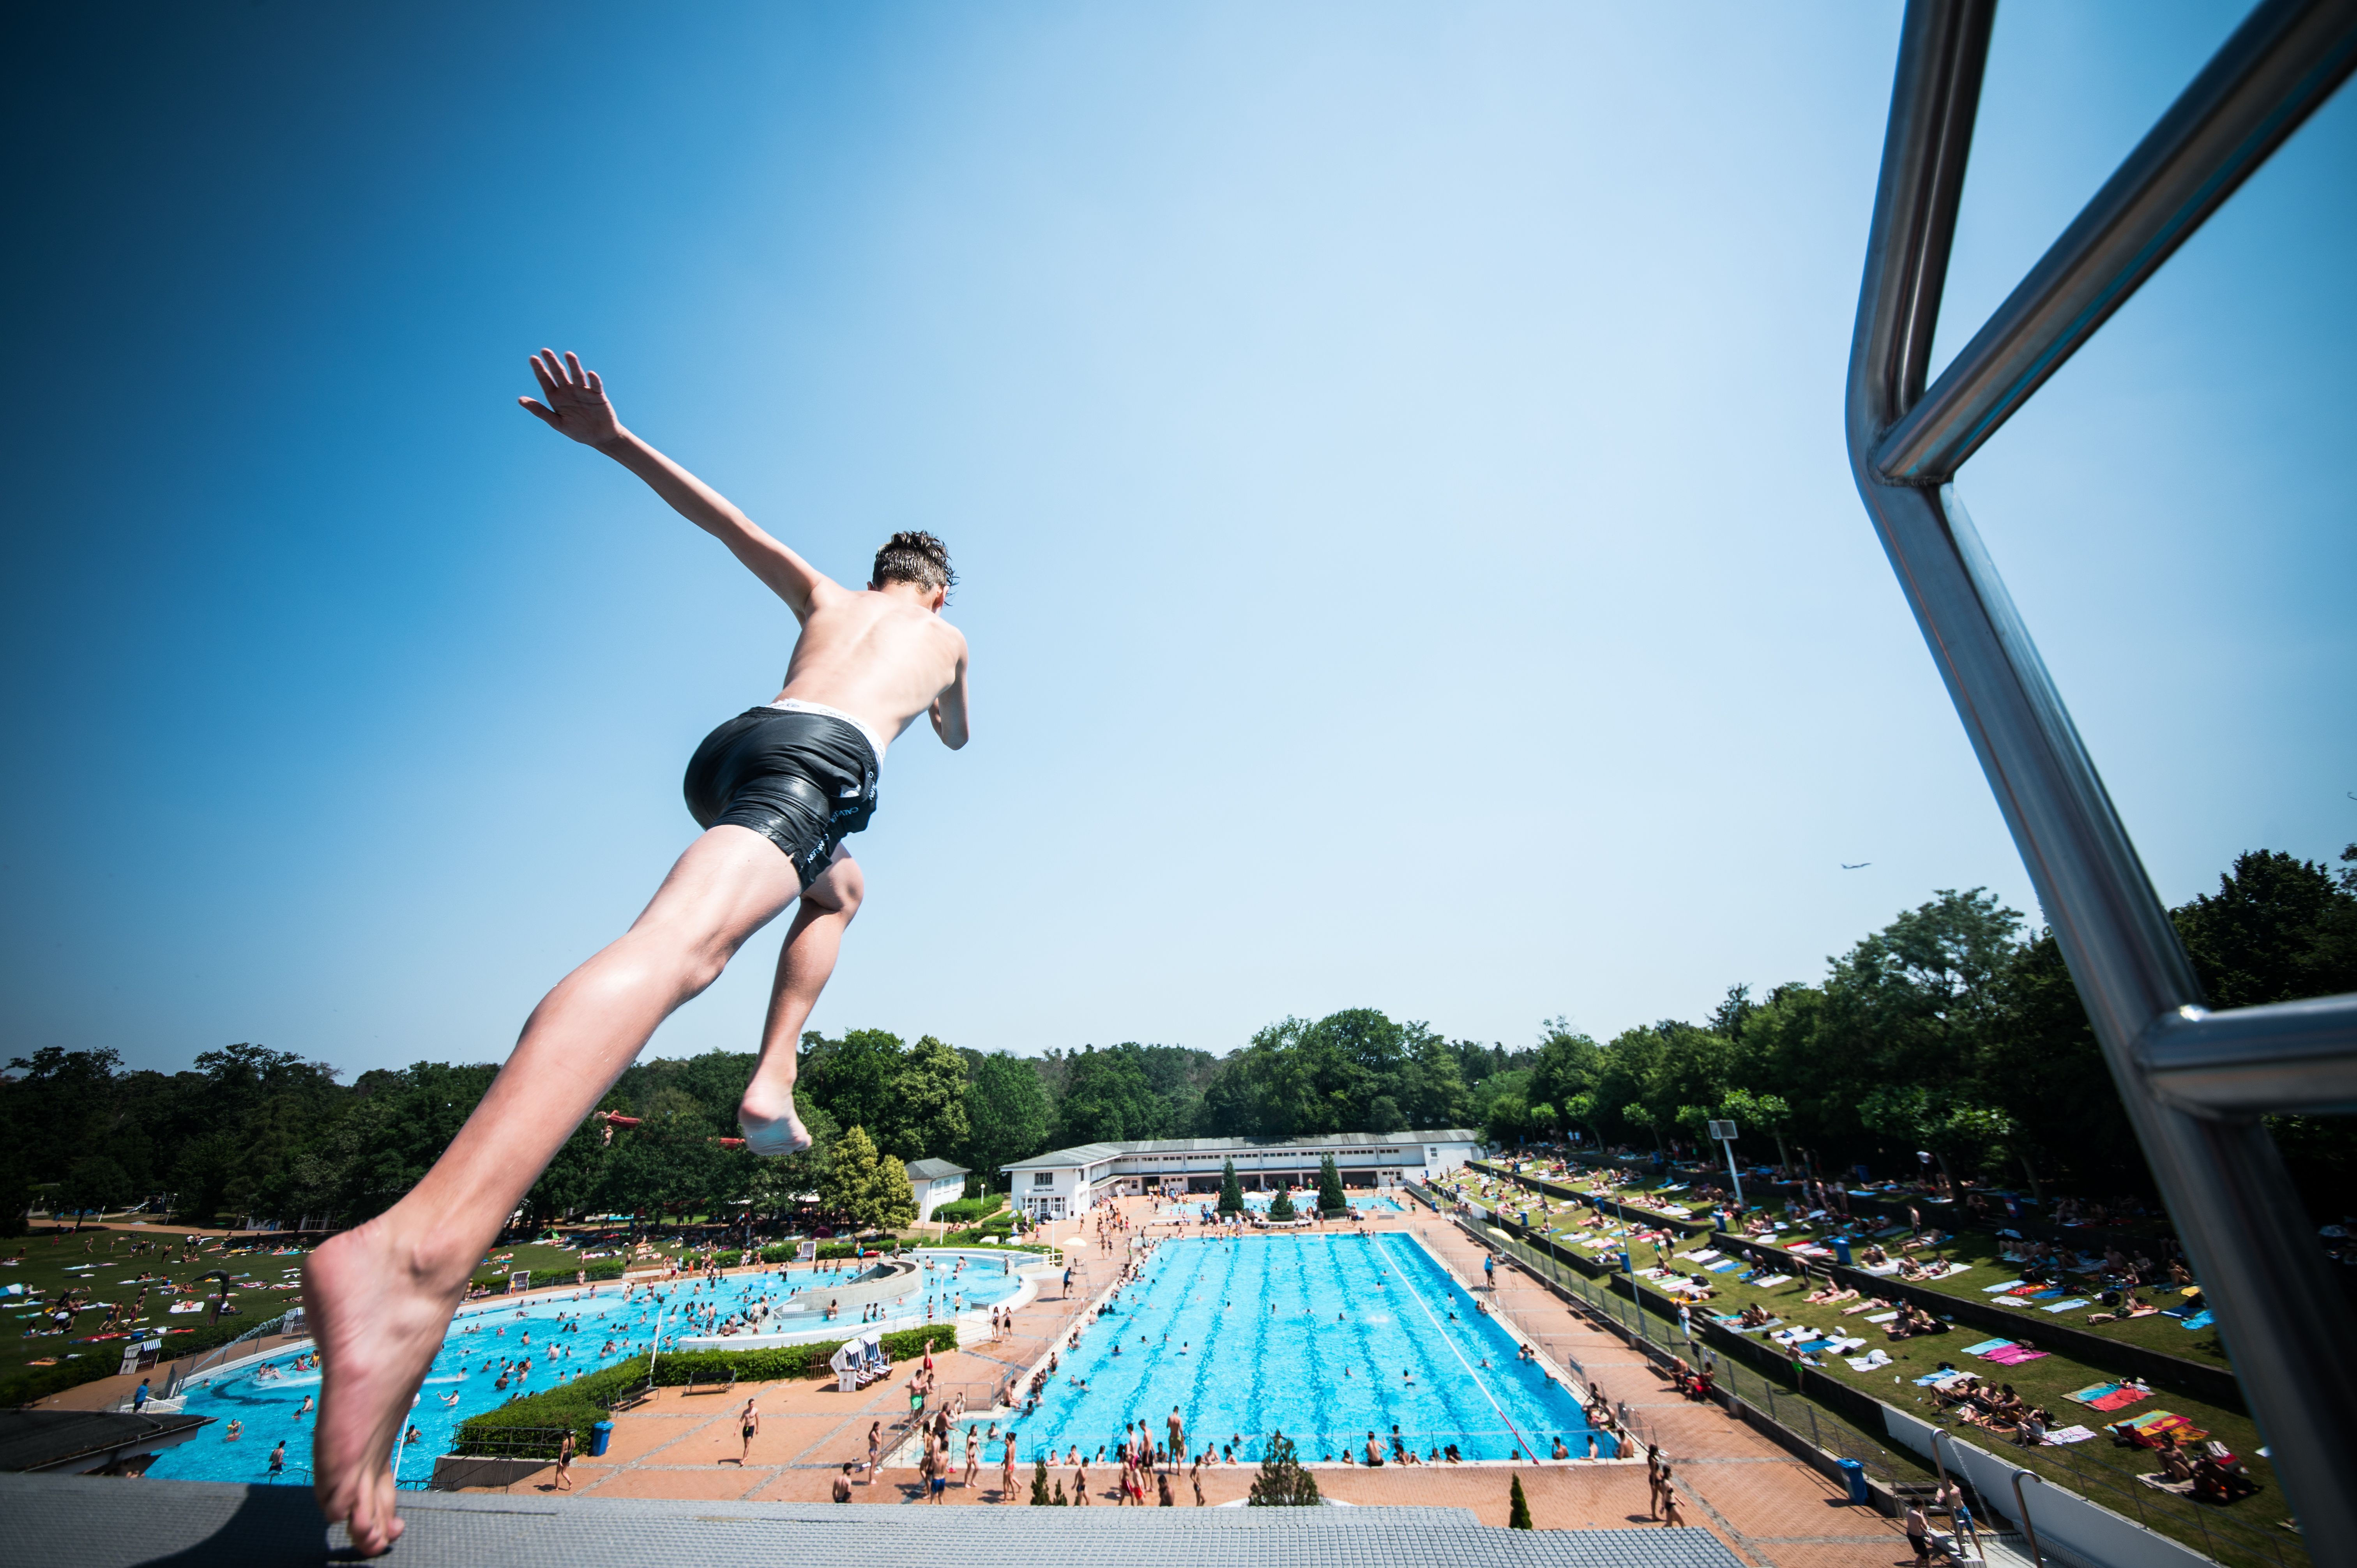 A boy jumps from a diving board in to a swimming pool in Frankfurt am Main, western Germany on June 26.